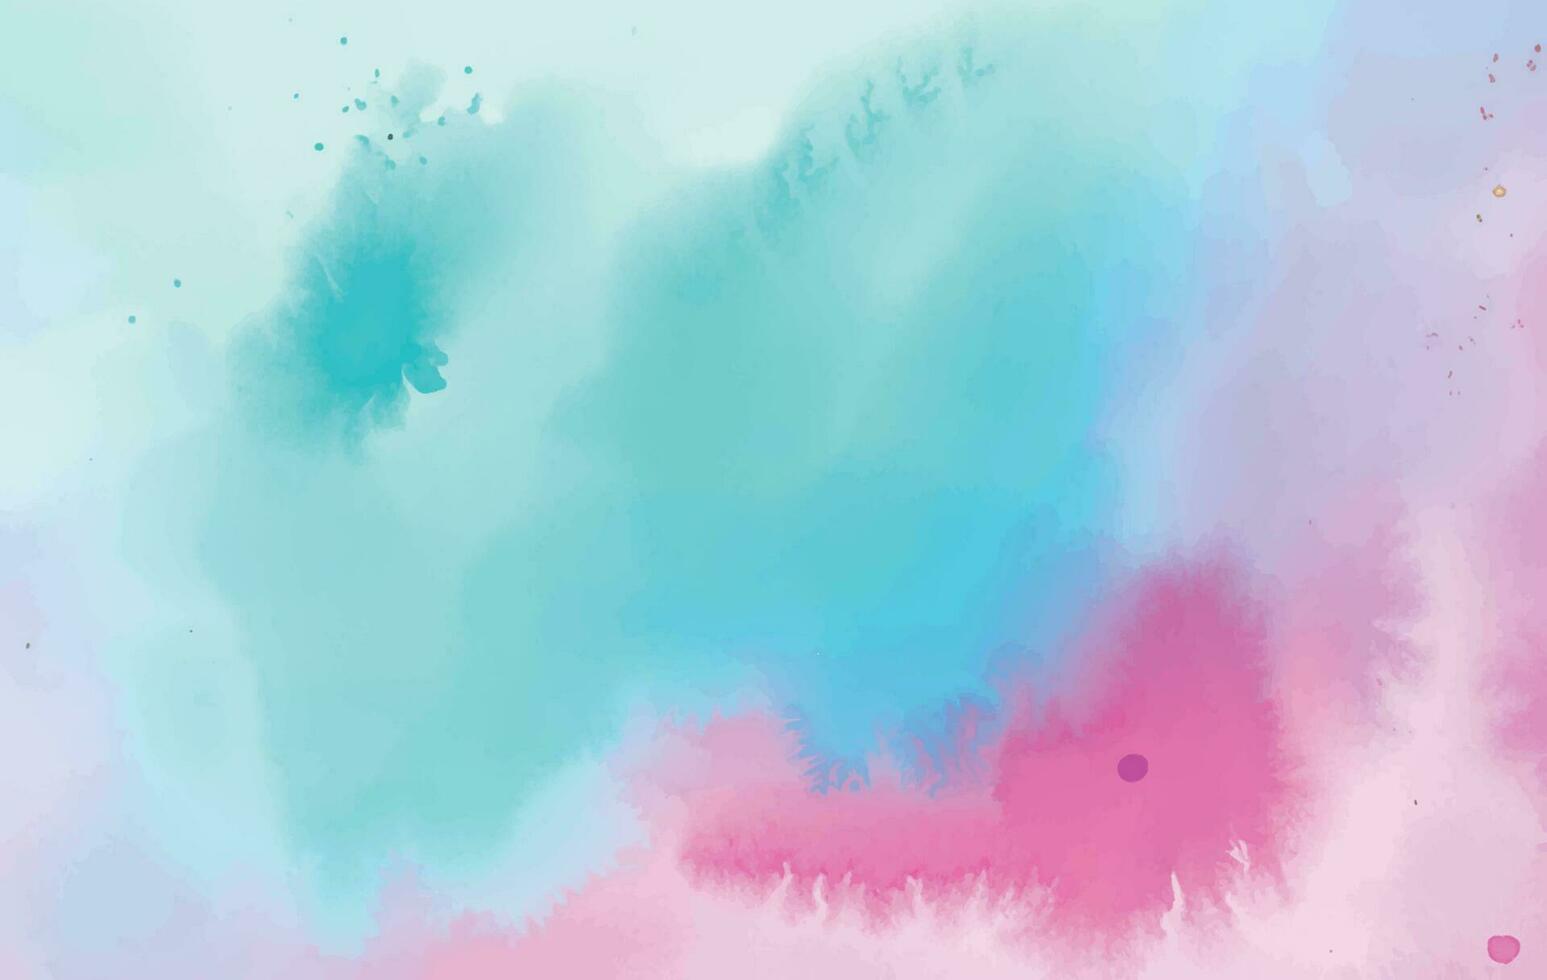 vector hand painted watercolor abstract watercolor background